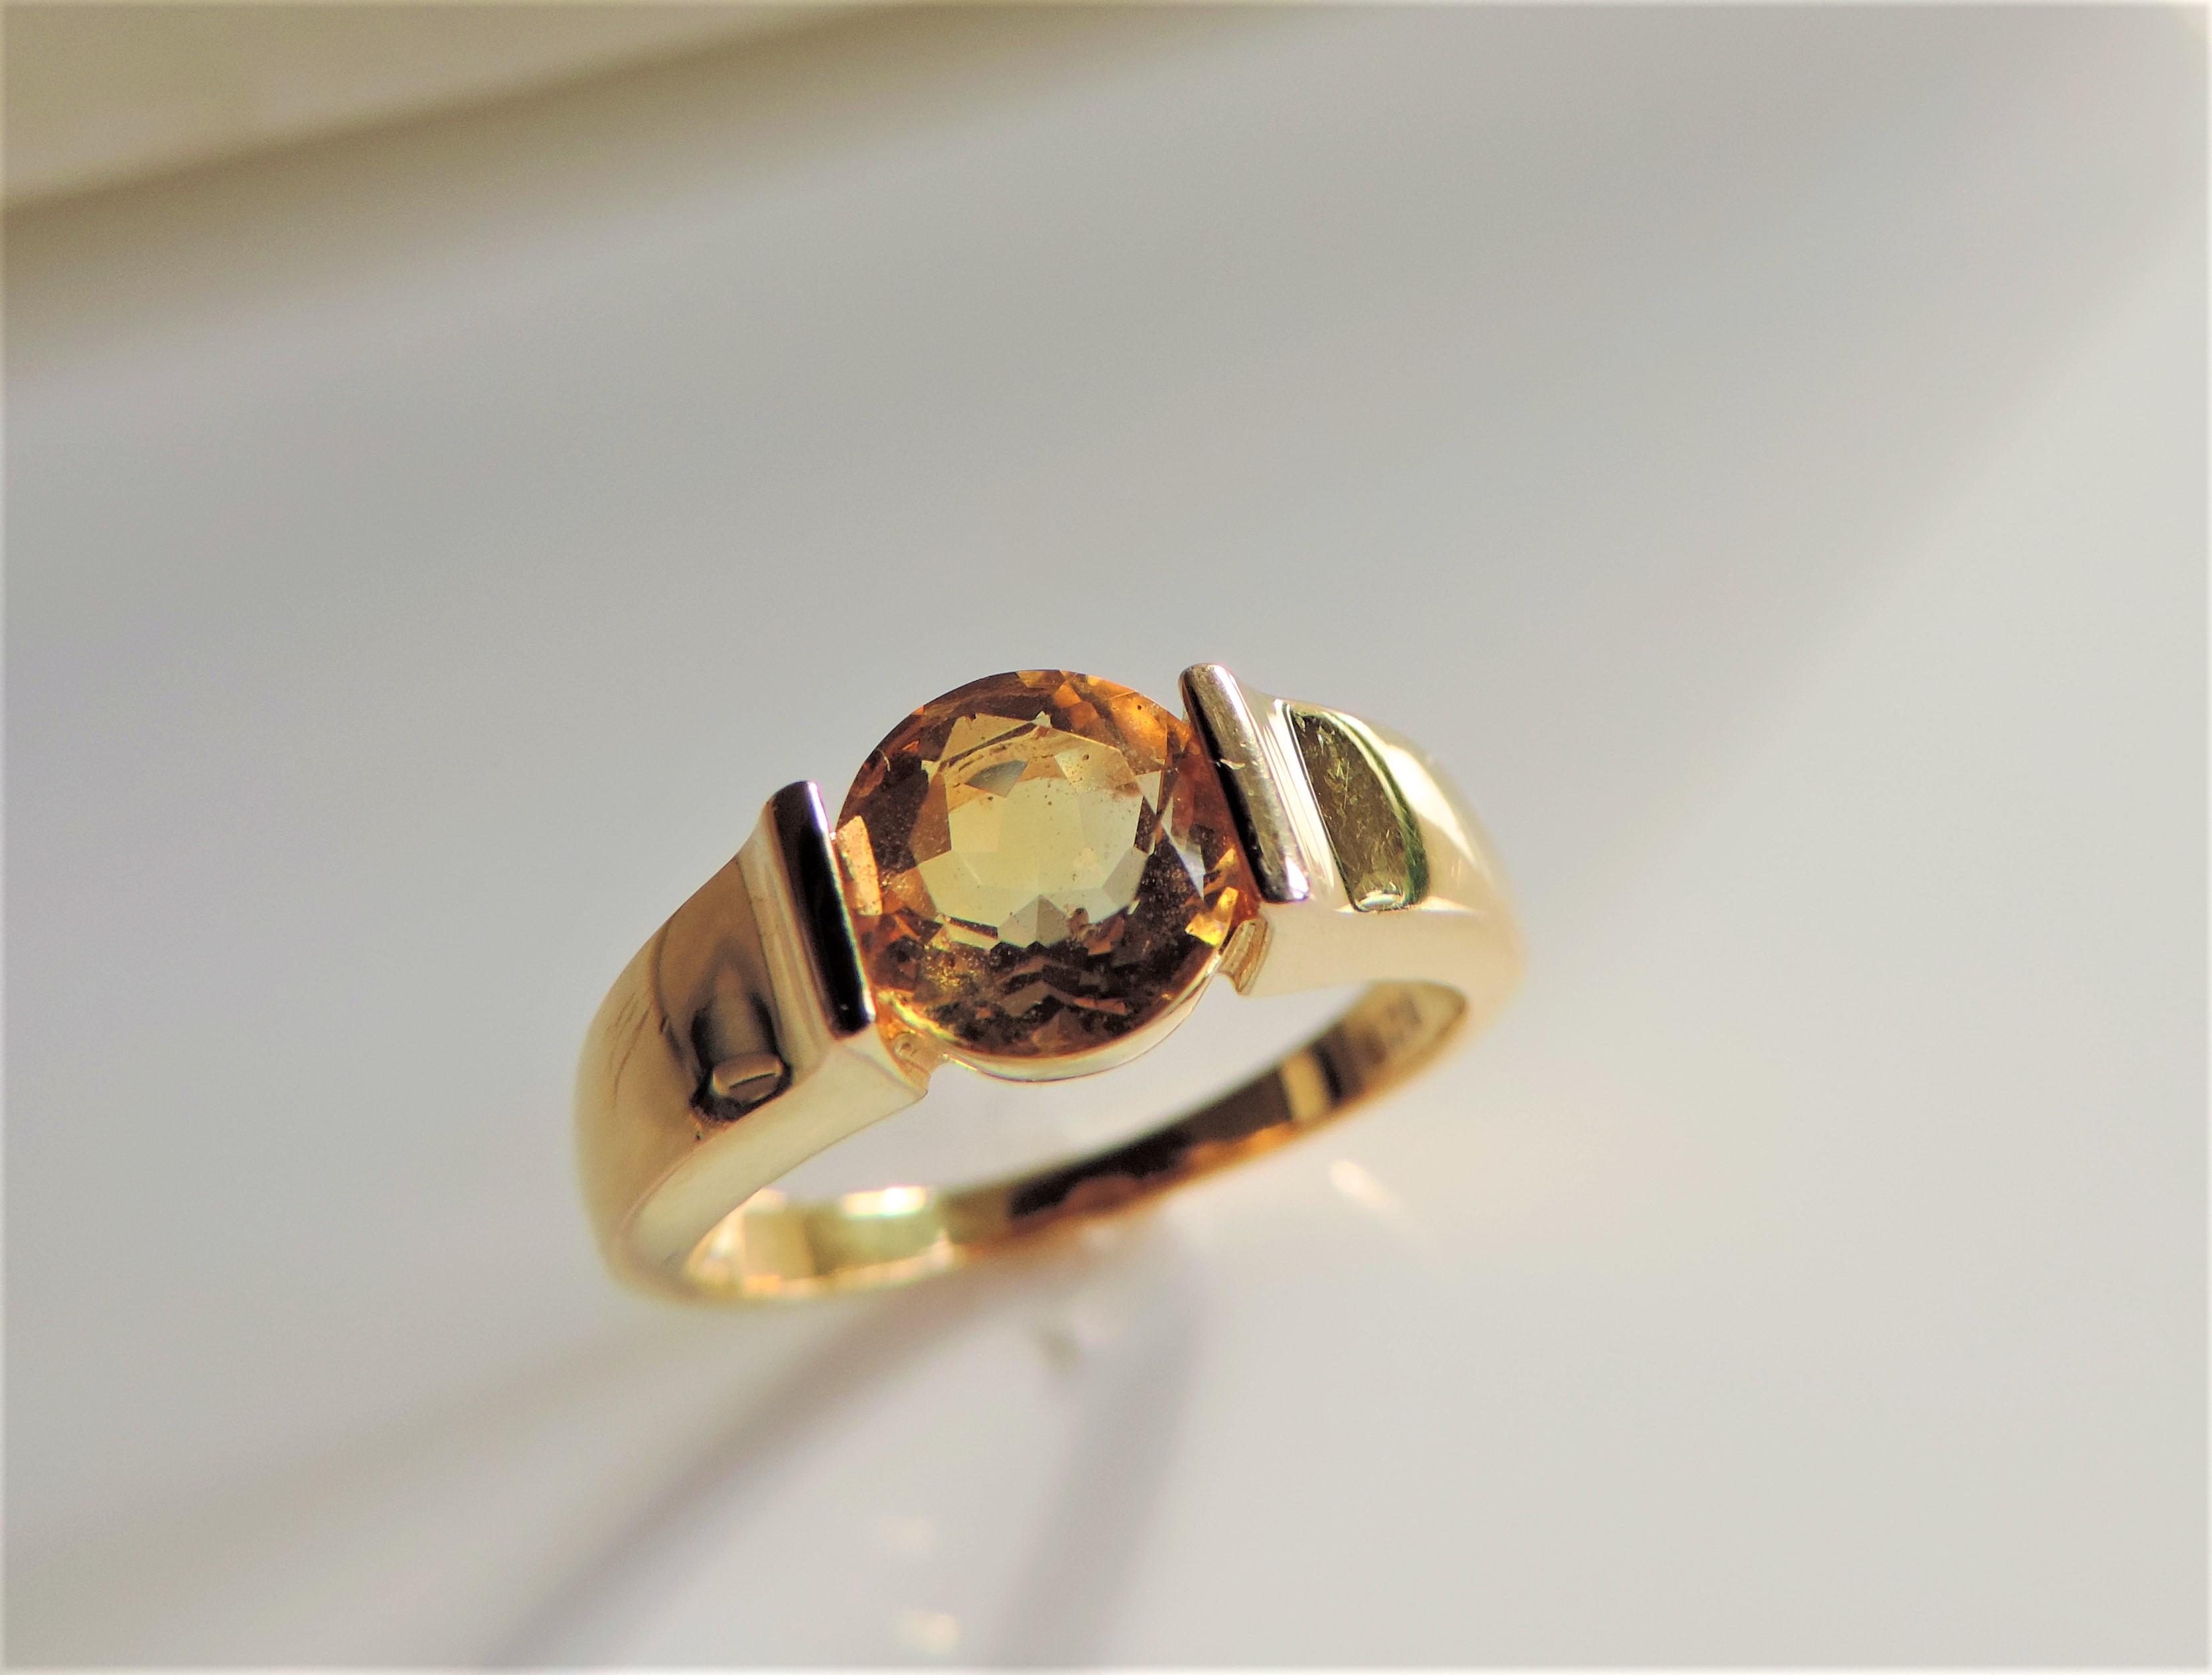 Gold on Silver 1.3 Ct Citrine Solitaire Ring New with Gift Box - Image 4 of 4